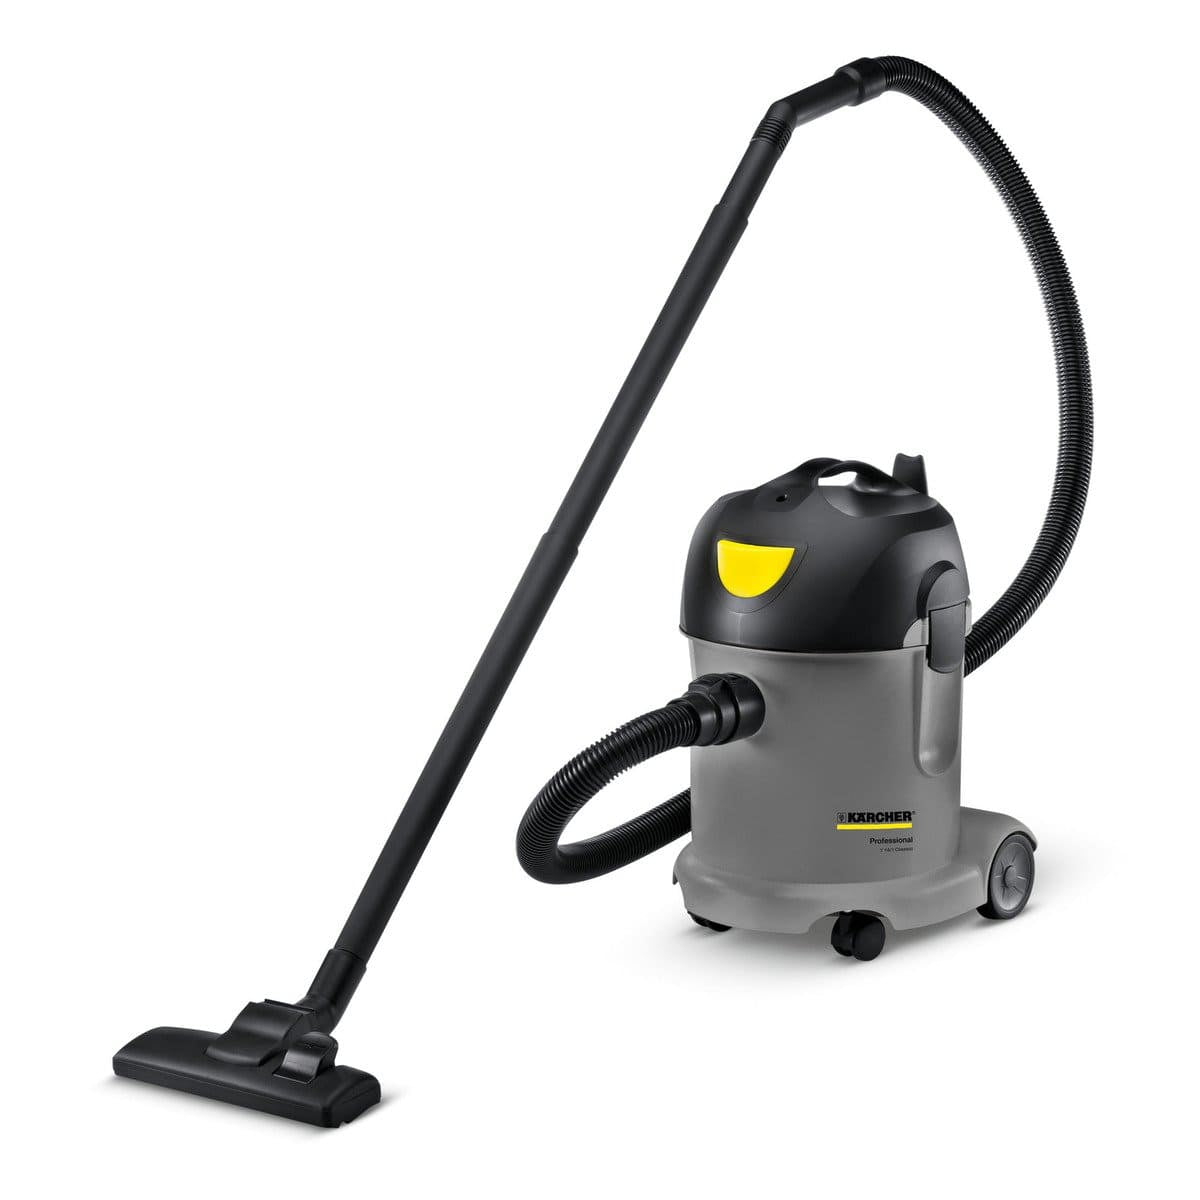 Karcher 14L Dry Vacuum Cleaner - T 14/1 Classic | Supply Master | Accra, Ghana Tools Building Steel Engineering Hardware tool